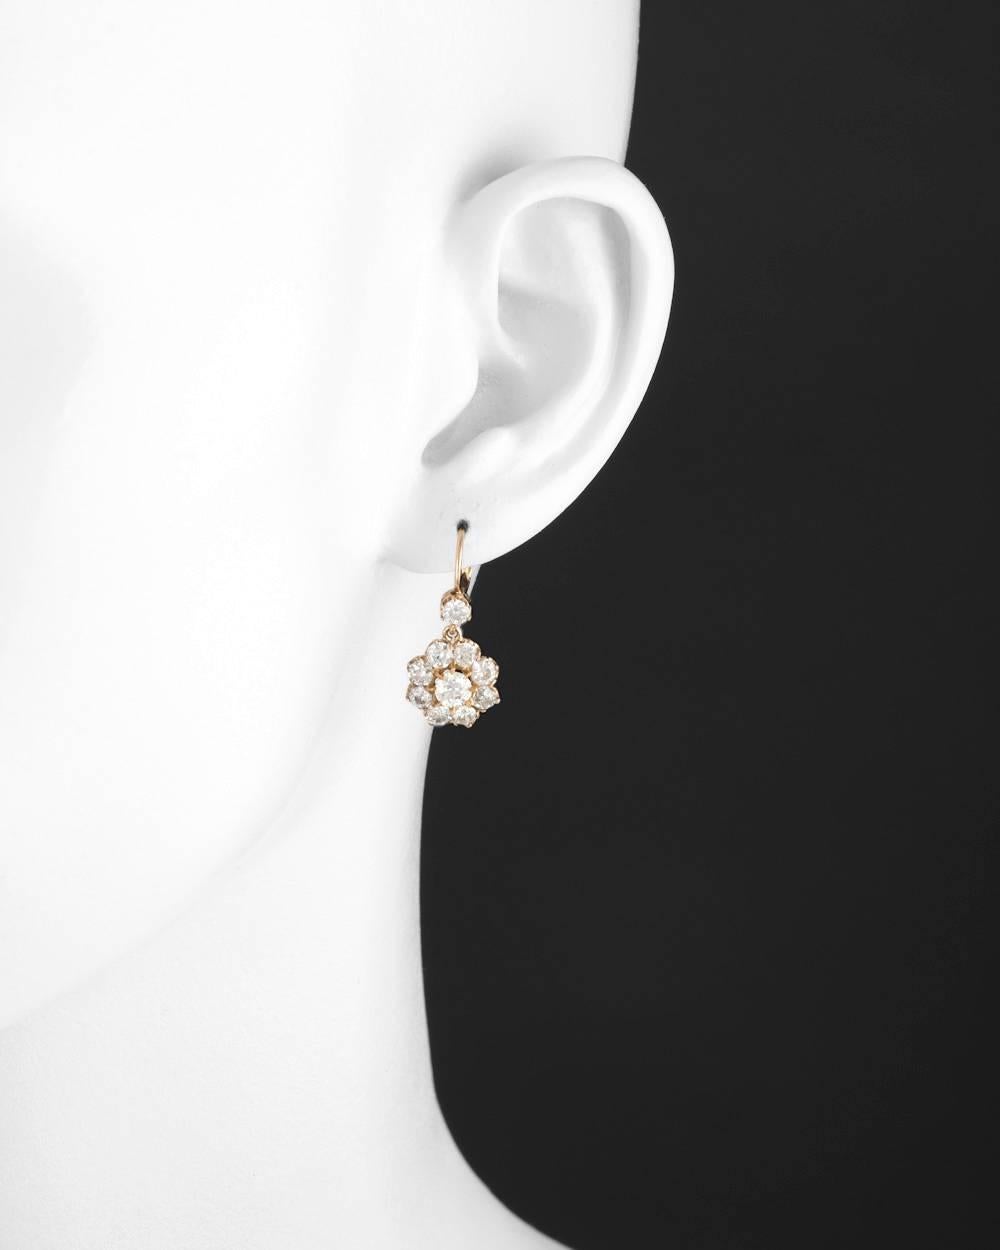 Dormeuse-style drop earrings, showcasing a floret-shaped cluster of old mine diamonds, mounted in 18k pink gold. Diamonds weighing approximately 3.30 total carats (the larger center diamonds are G-color and VS1-VS2 clarity, while the other diamonds